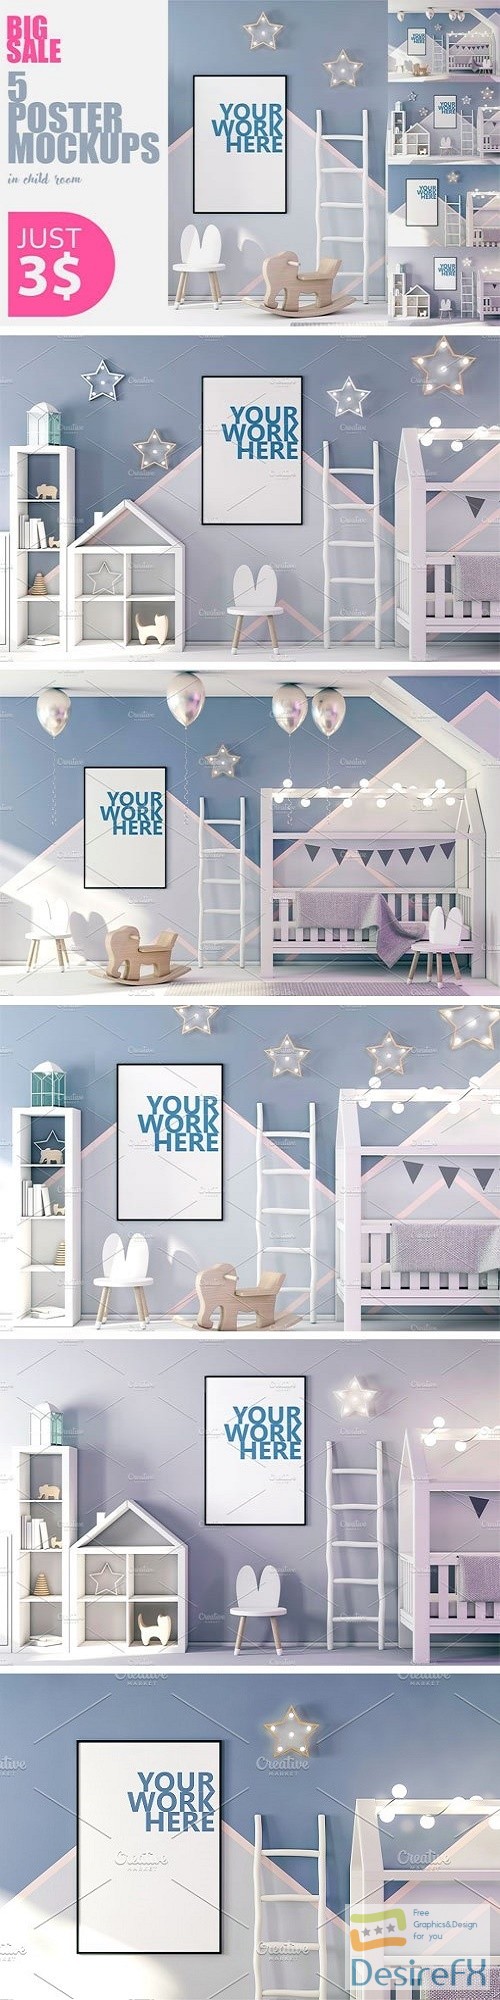 PSD Posters Mockup in Child Interior - 2350216